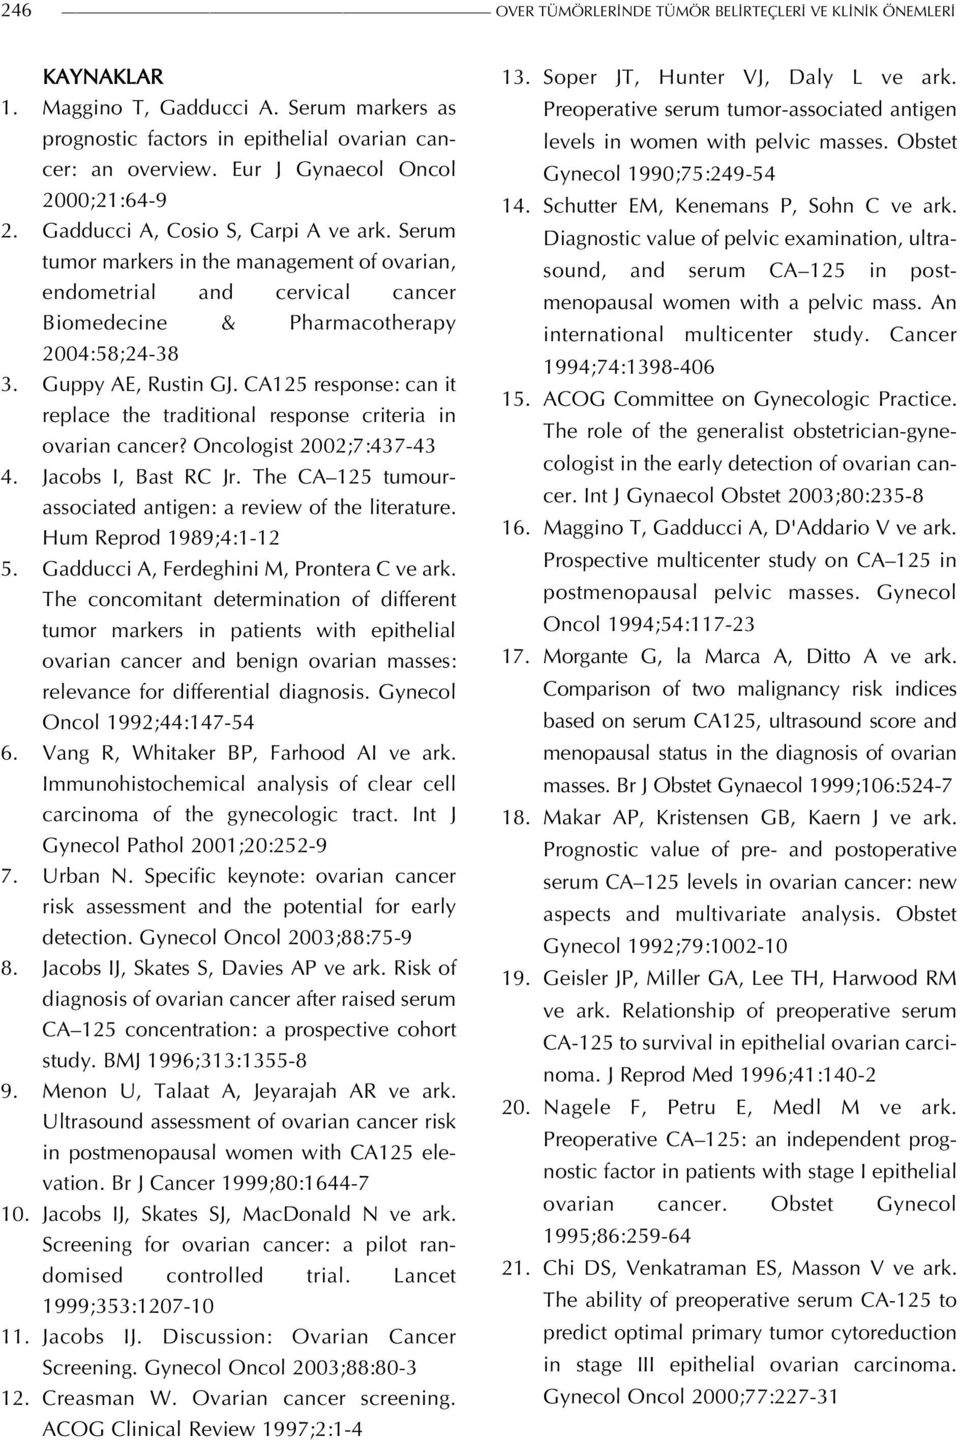 Serum tumor markers in the management of ovarian, endometrial and cervical cancer Biomedecine & Pharmacotherapy 2004:58;24-38 3. Guppy AE, Rustin GJ.